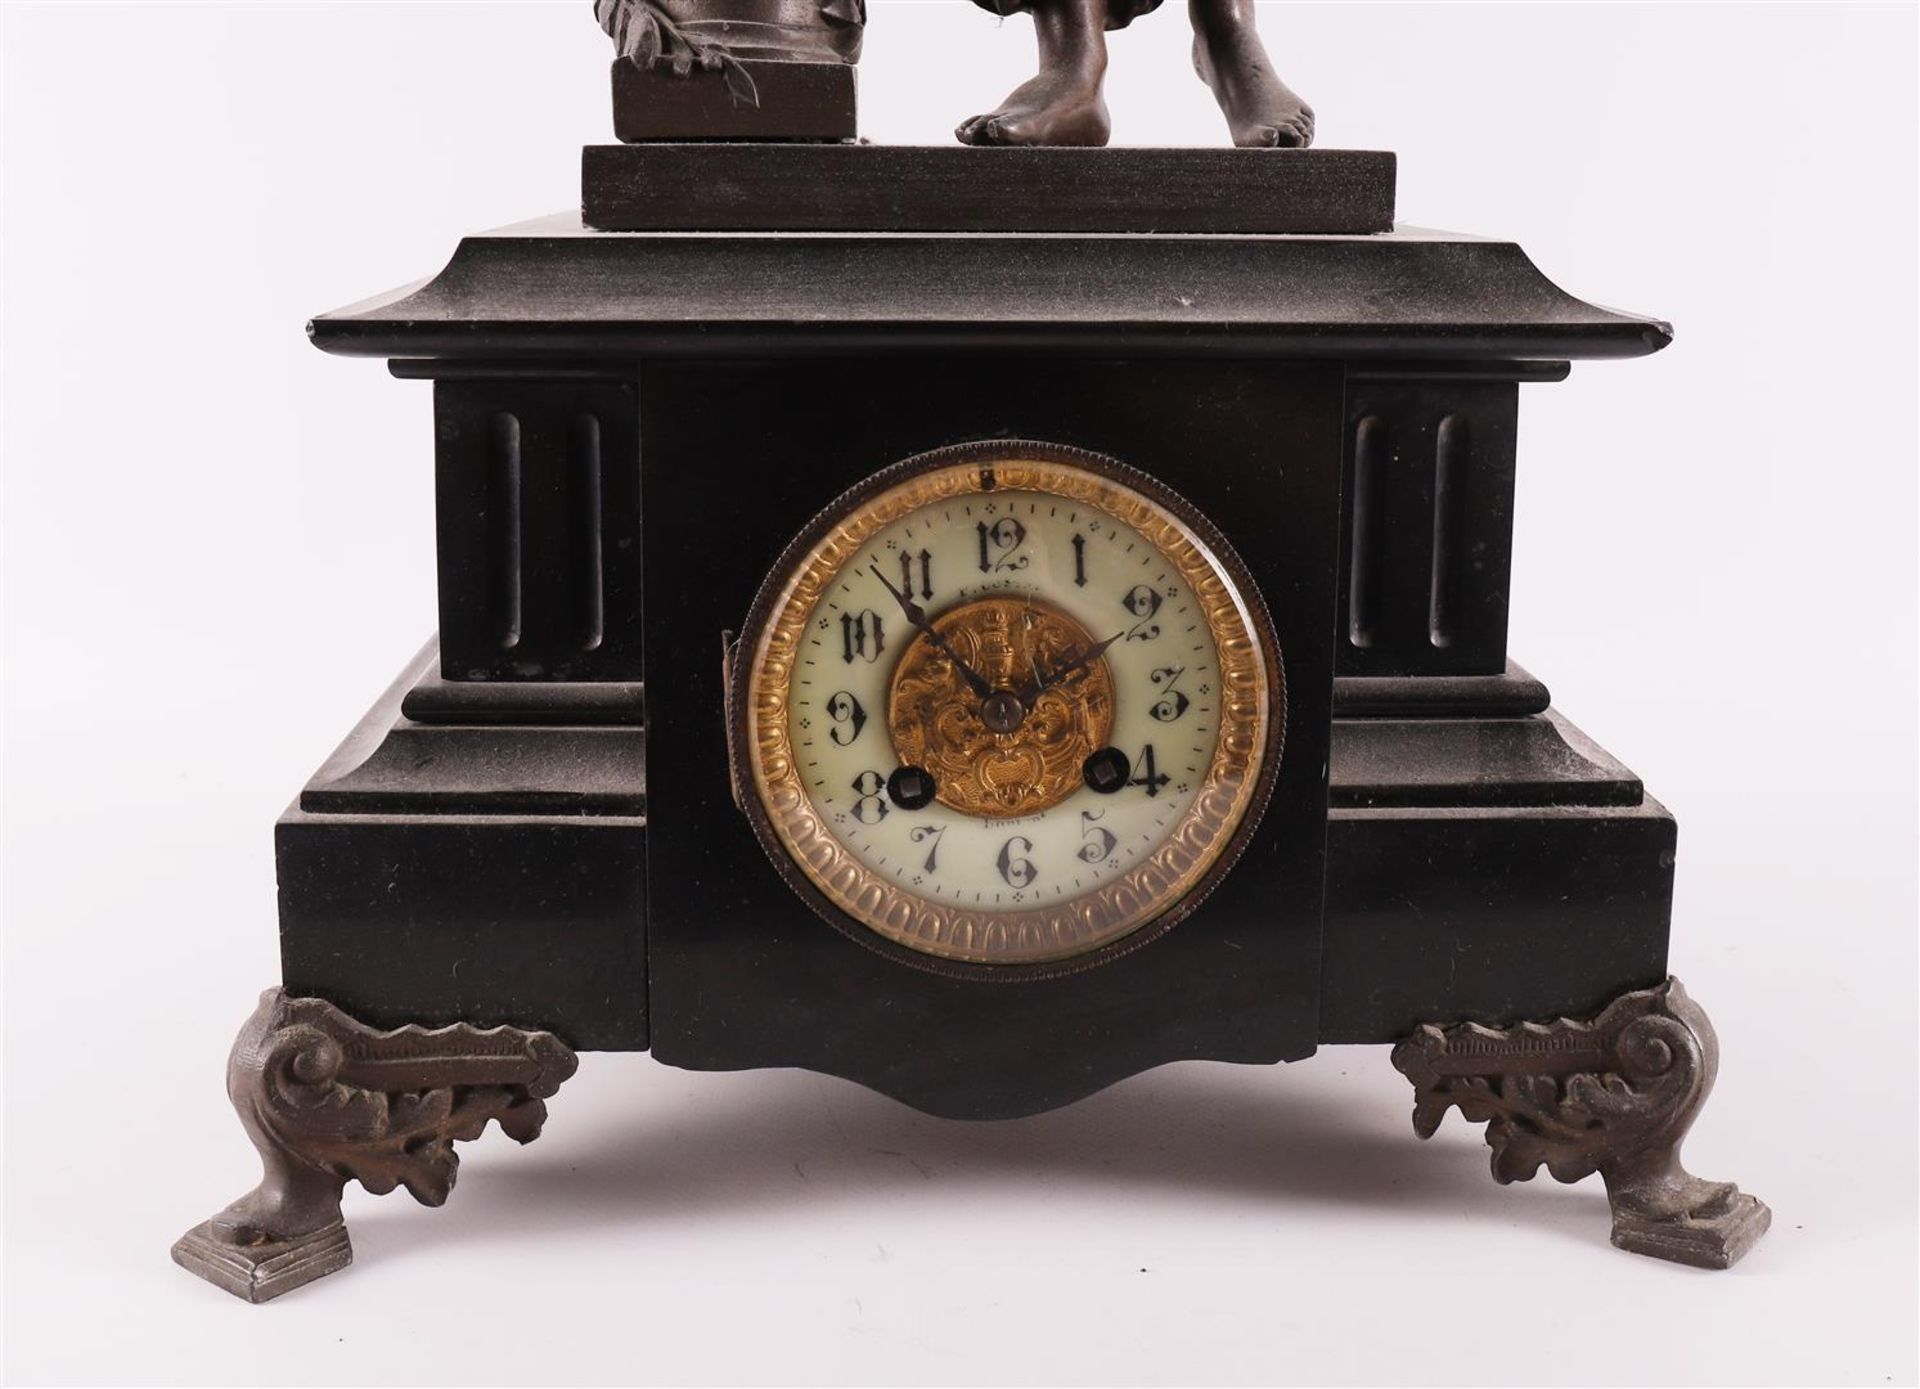 A mantel clock in black natural stone casing, France, ca. 1880. - Image 2 of 6